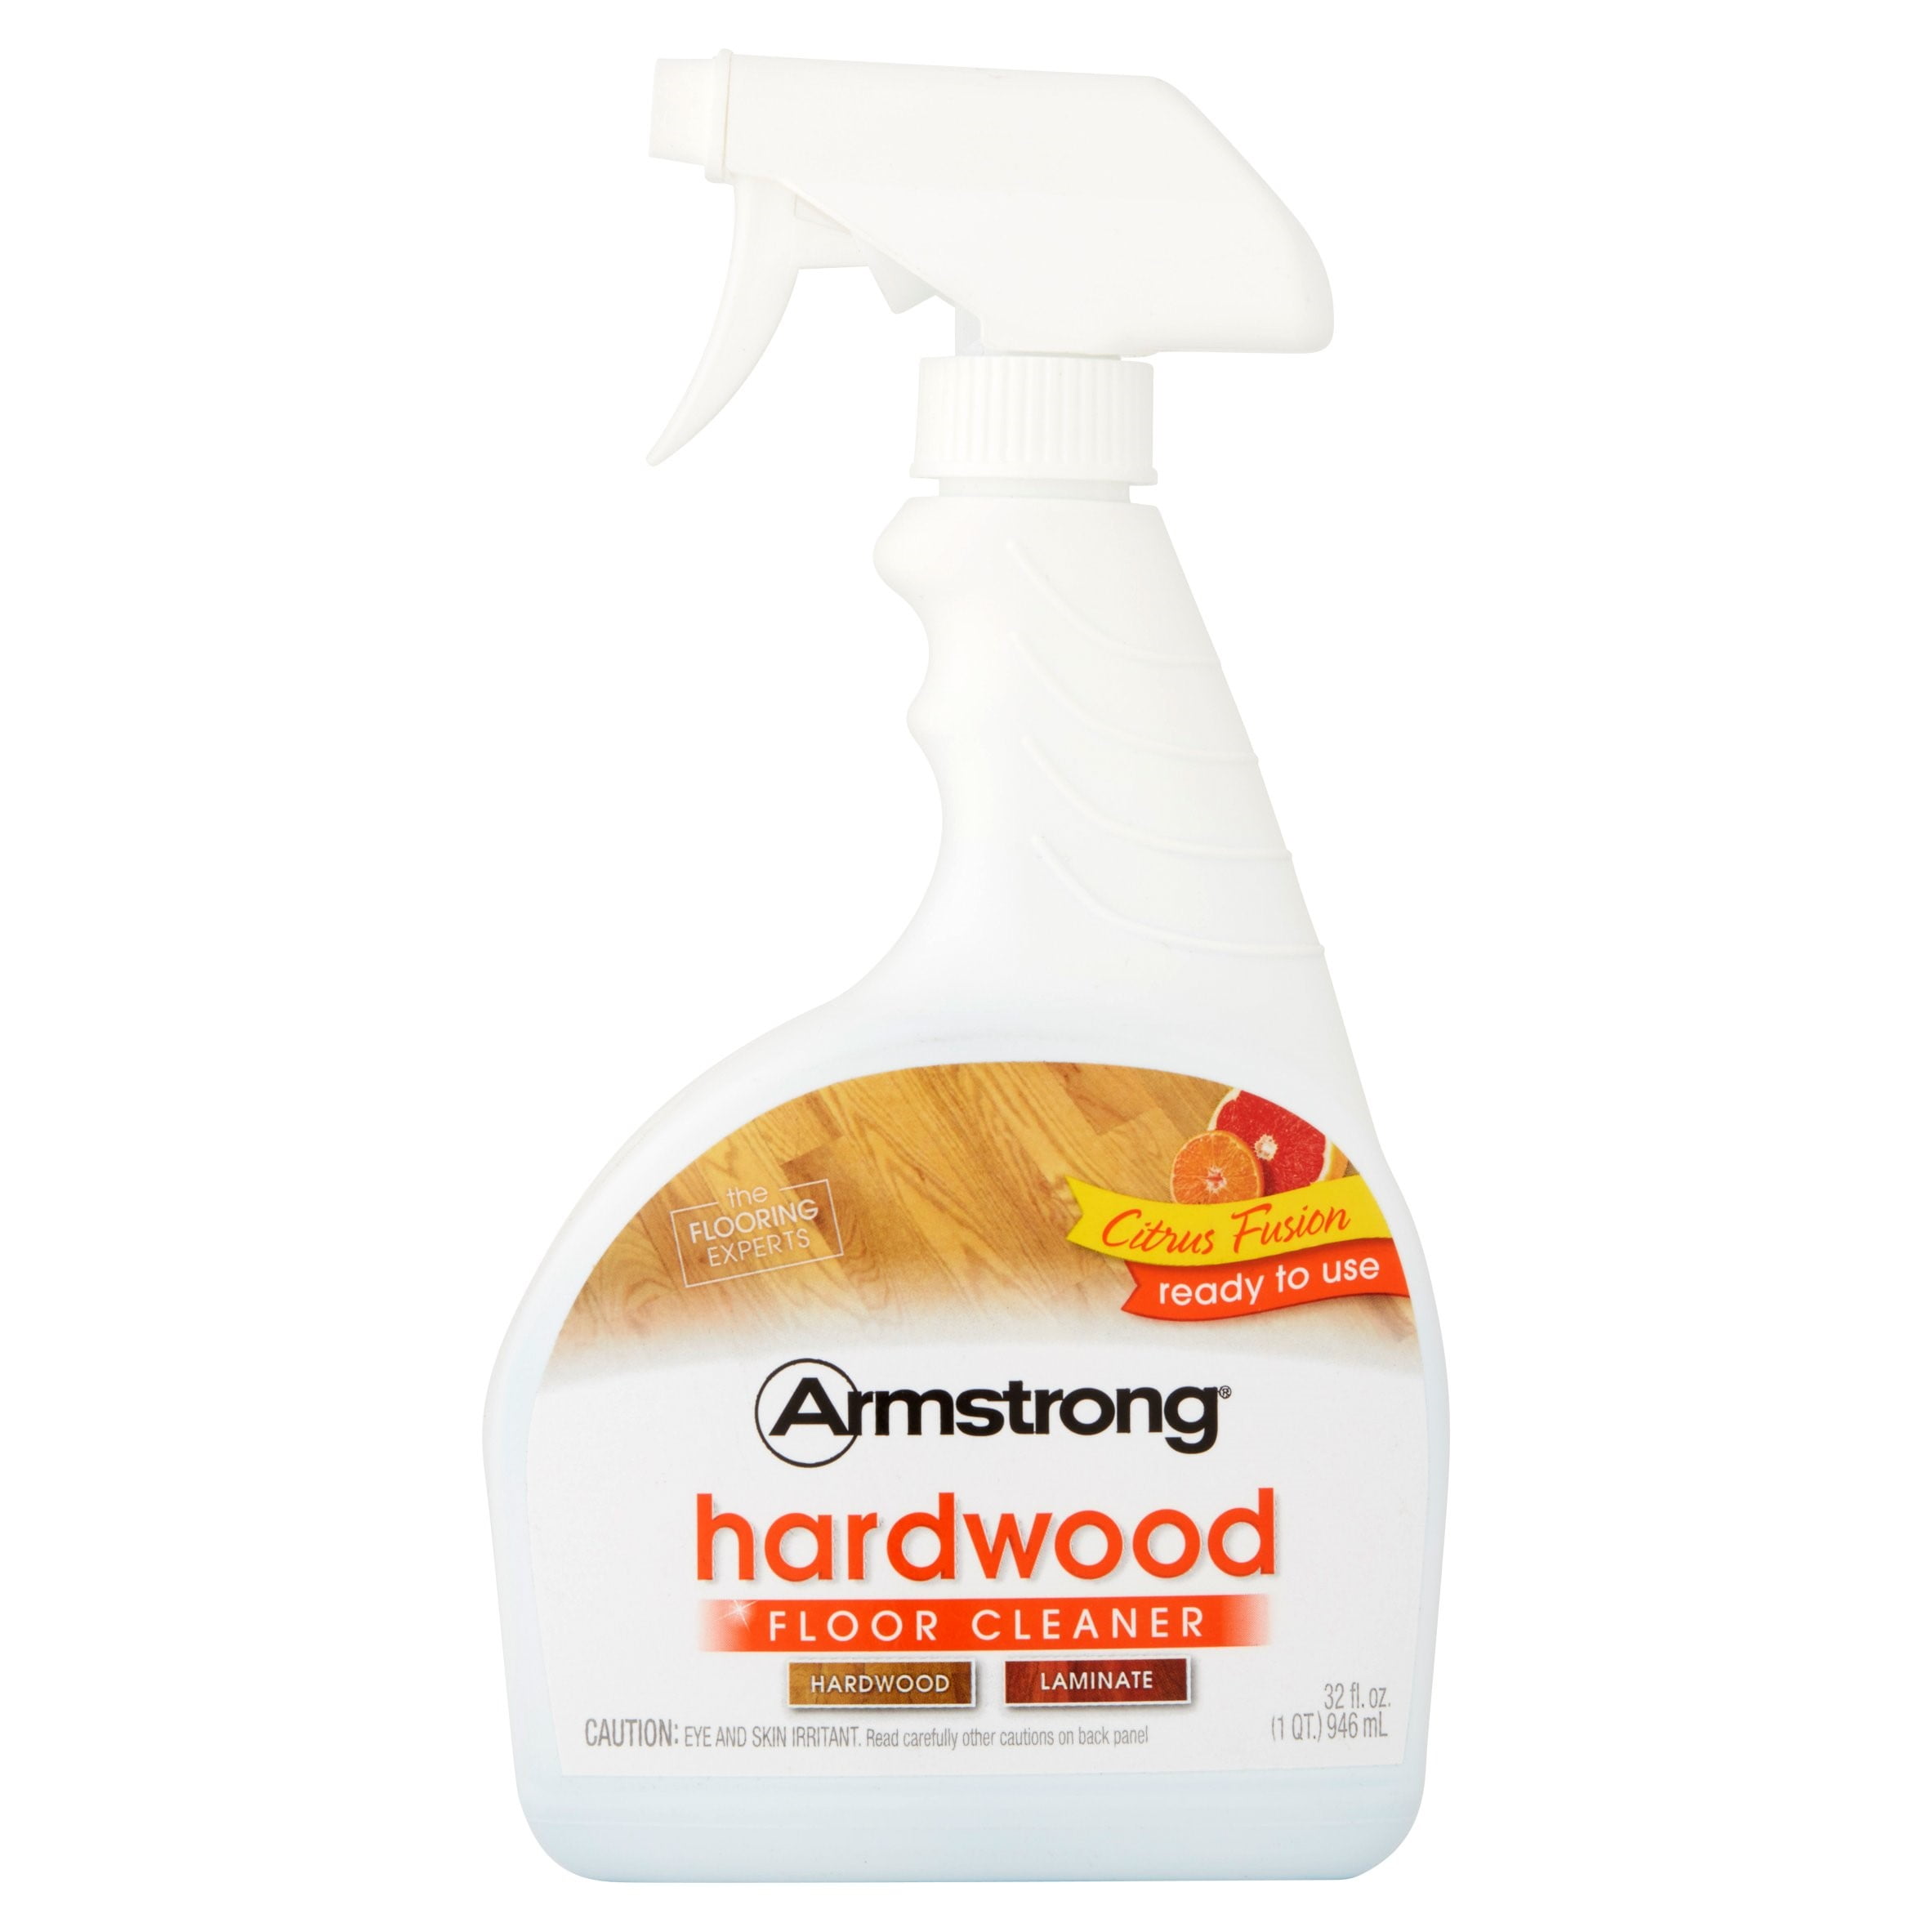 Armstrong Hardwood Floor Cleaner Spray, What Is Safe For Cleaning Hardwood Floors